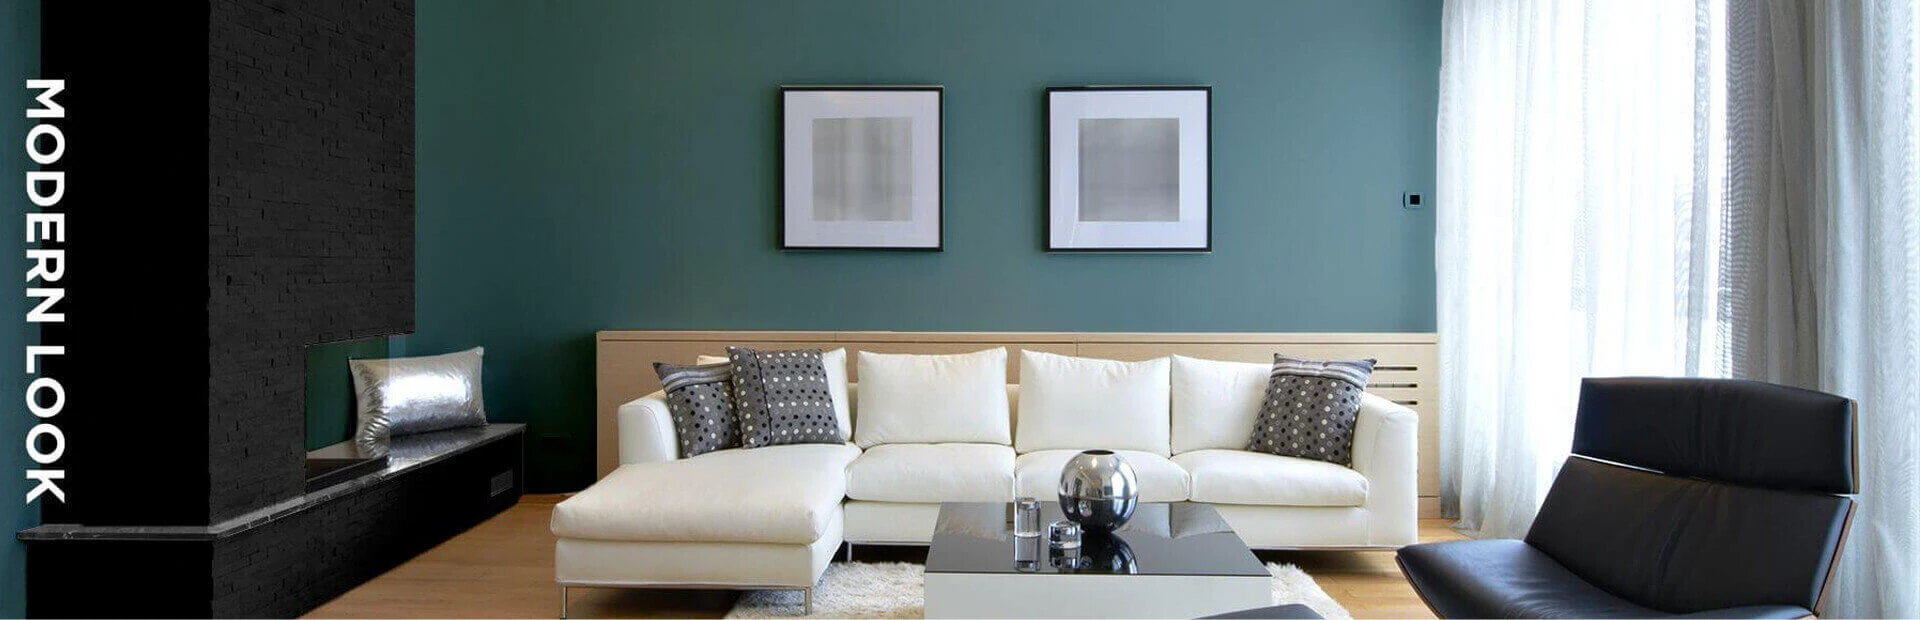 Living room in black, off-white, and green, featuring furniture and paintings on walls.